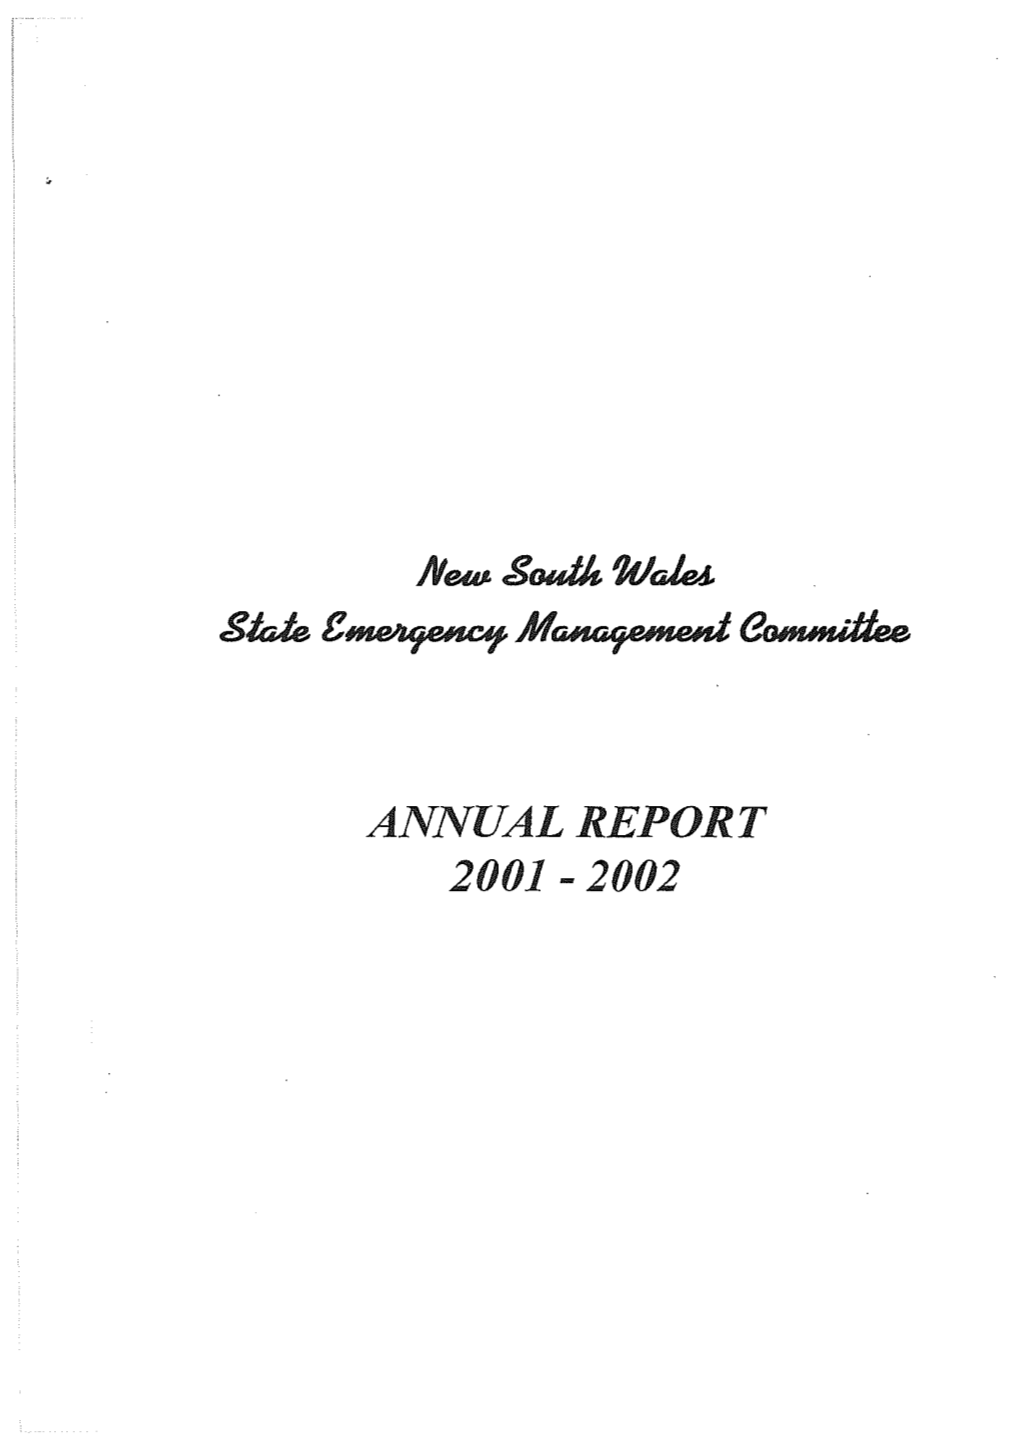 ANNUAL REPORT 2001-2002 'J{Fw Sou:Tfi Wales €BY State P,Mergency Management Committee